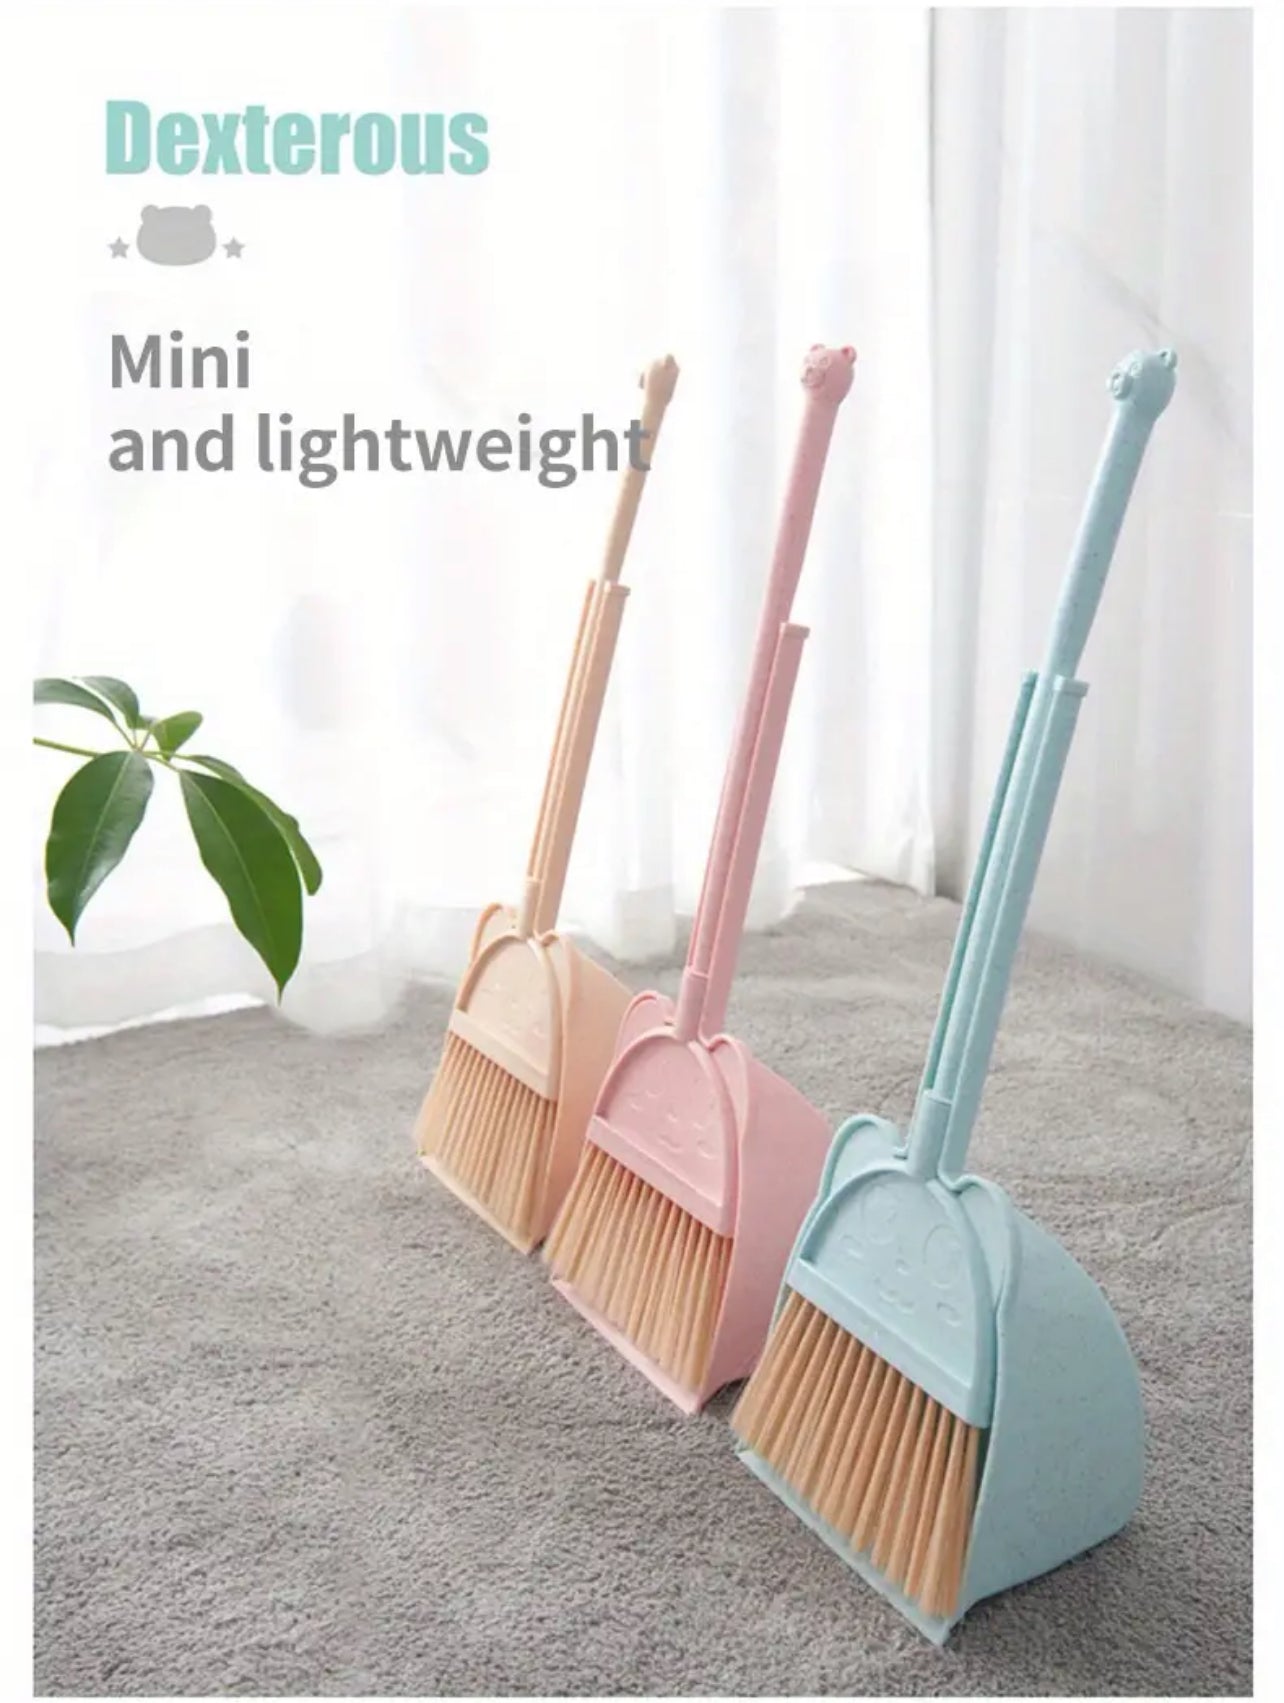 Clean Your Home in Style with this Mini Broom & Dustpan Set!